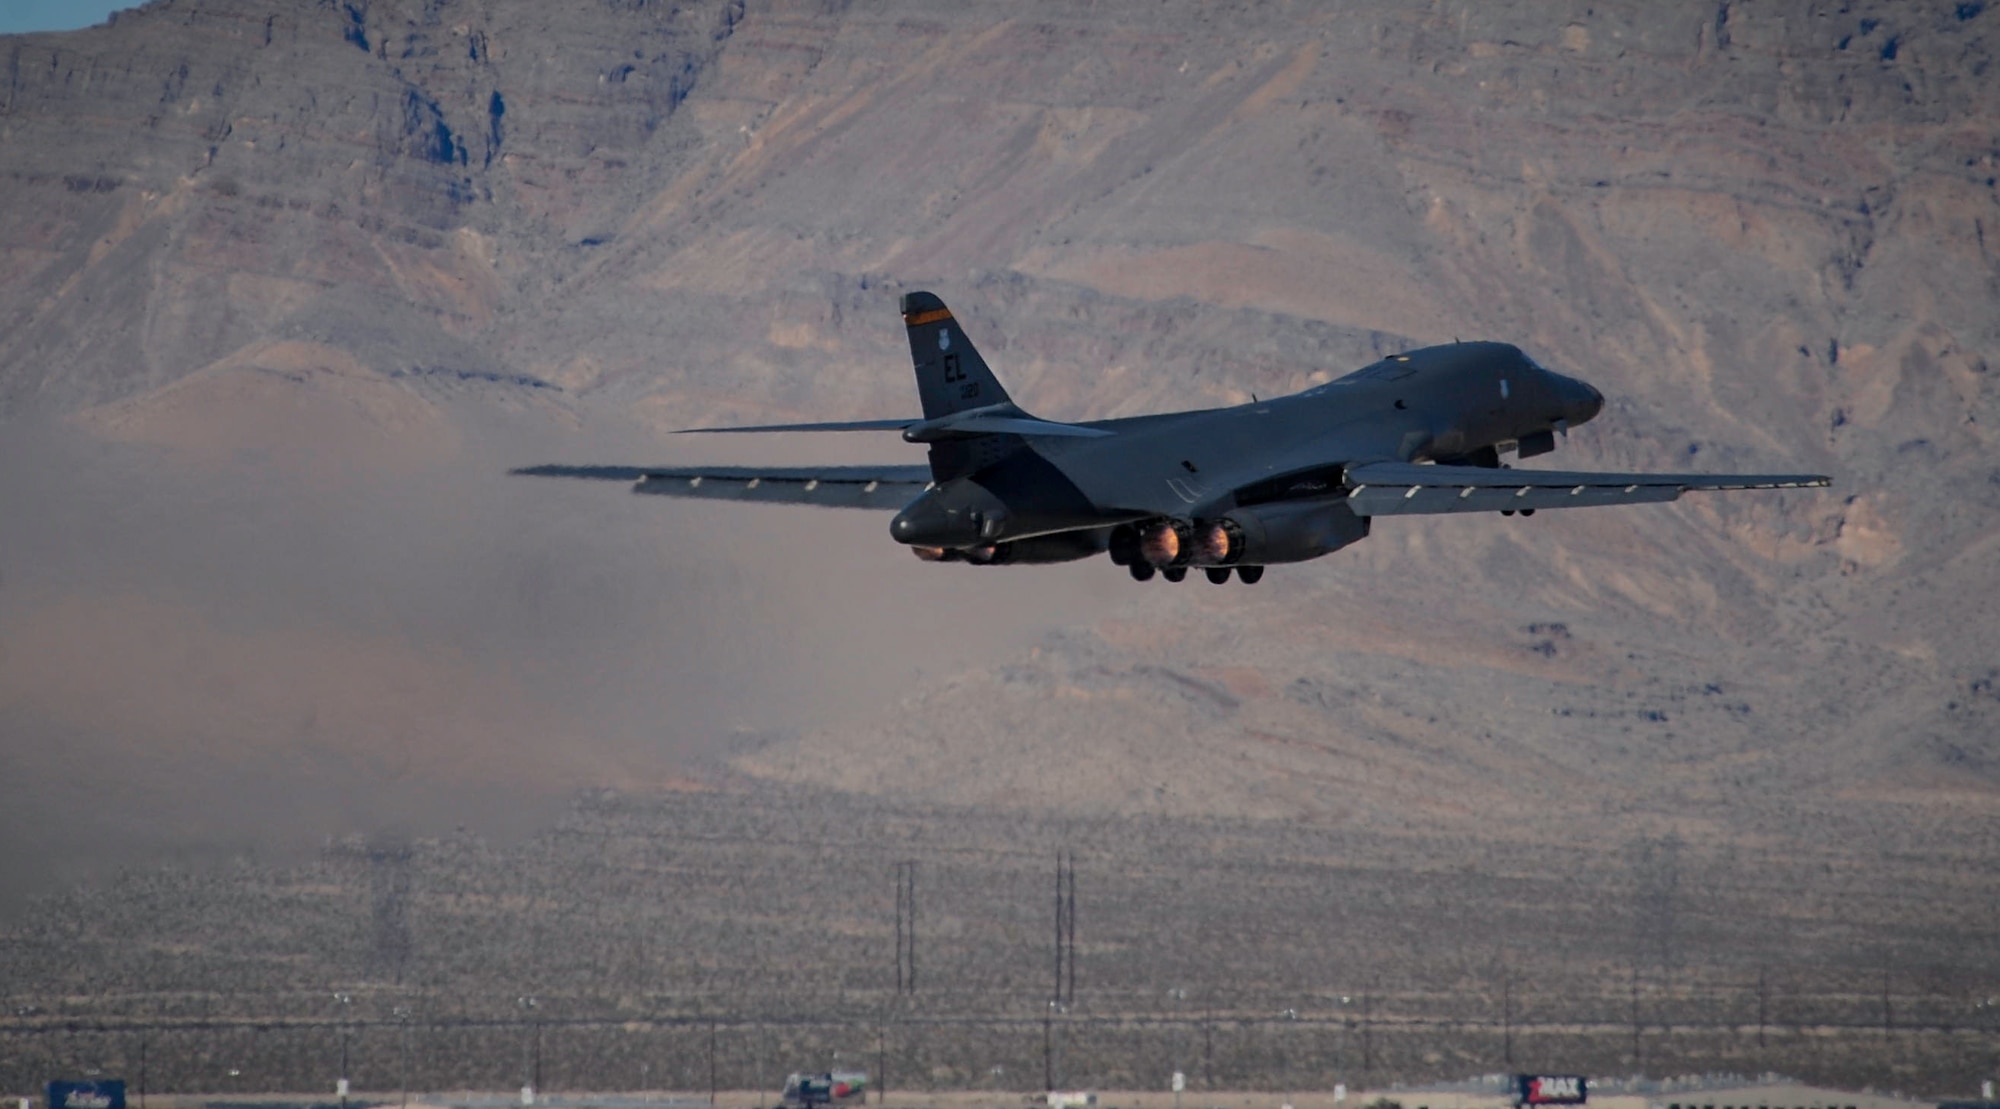 A B-1B Lancer assigned to the 34th Bomb Squadron, Ellsworth Air Force Base, S.D., takes off during Red Flag 17-1 on Nellis Air Force Base, Nev., Jan 27, 2017.  Red Flag is an exercise at Nellis AFB that provides aircrews an opportunity to experience realistic, stressful combat situations in a controlled environment to increase mission capability. (U.S. Air Force photo by Airman 1st Class Kevin Tanenbaum/Released)